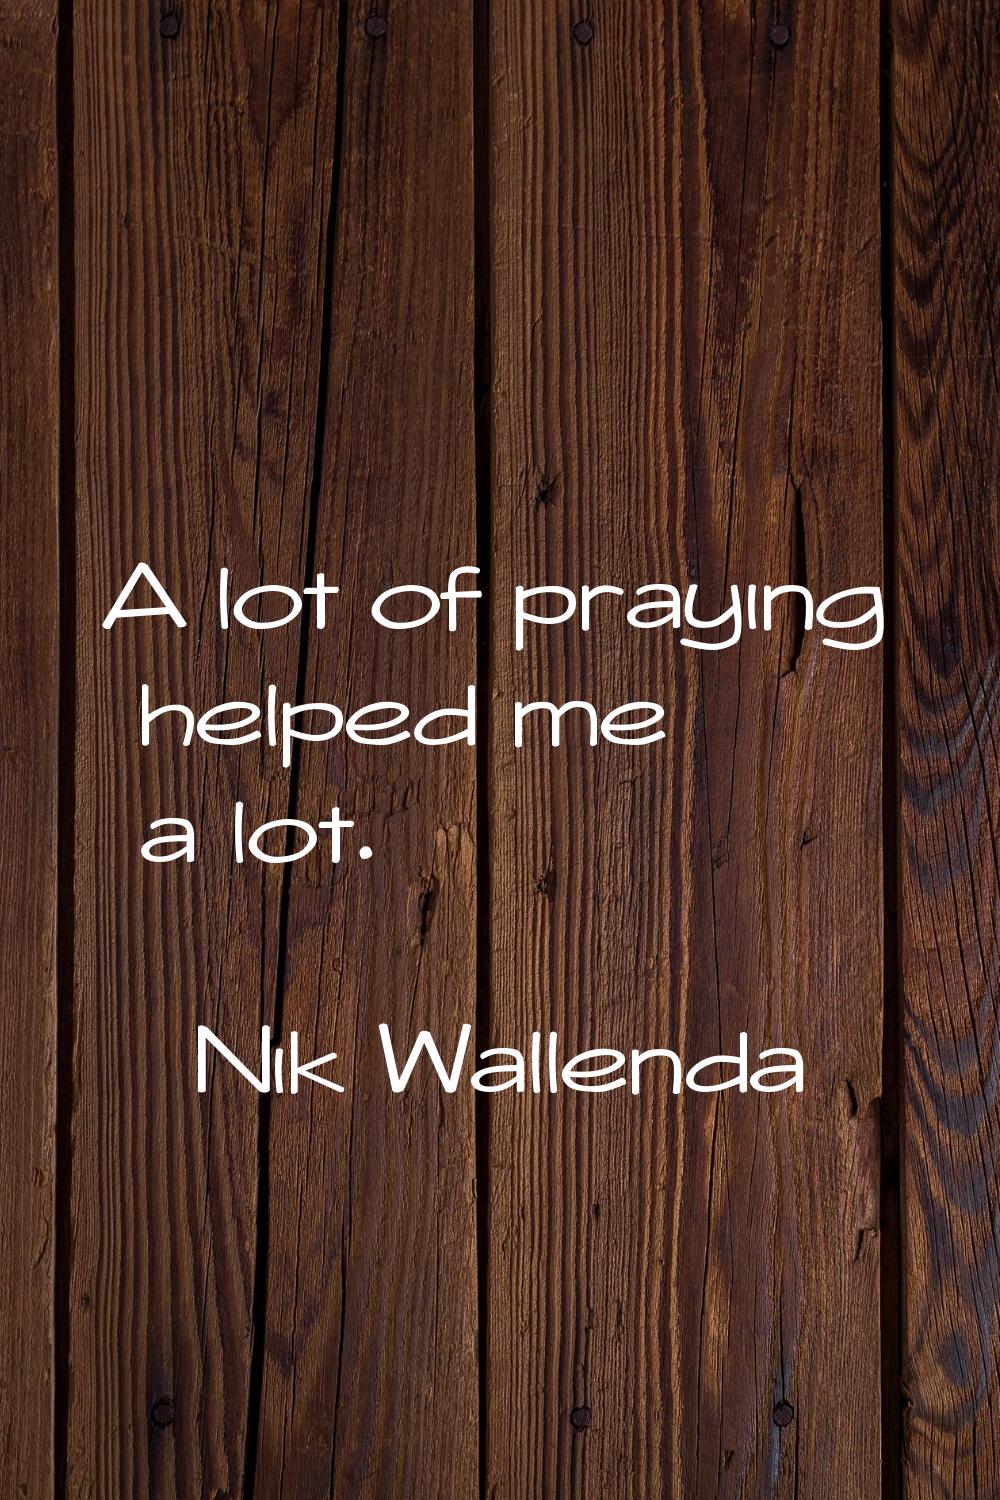 A lot of praying helped me a lot.